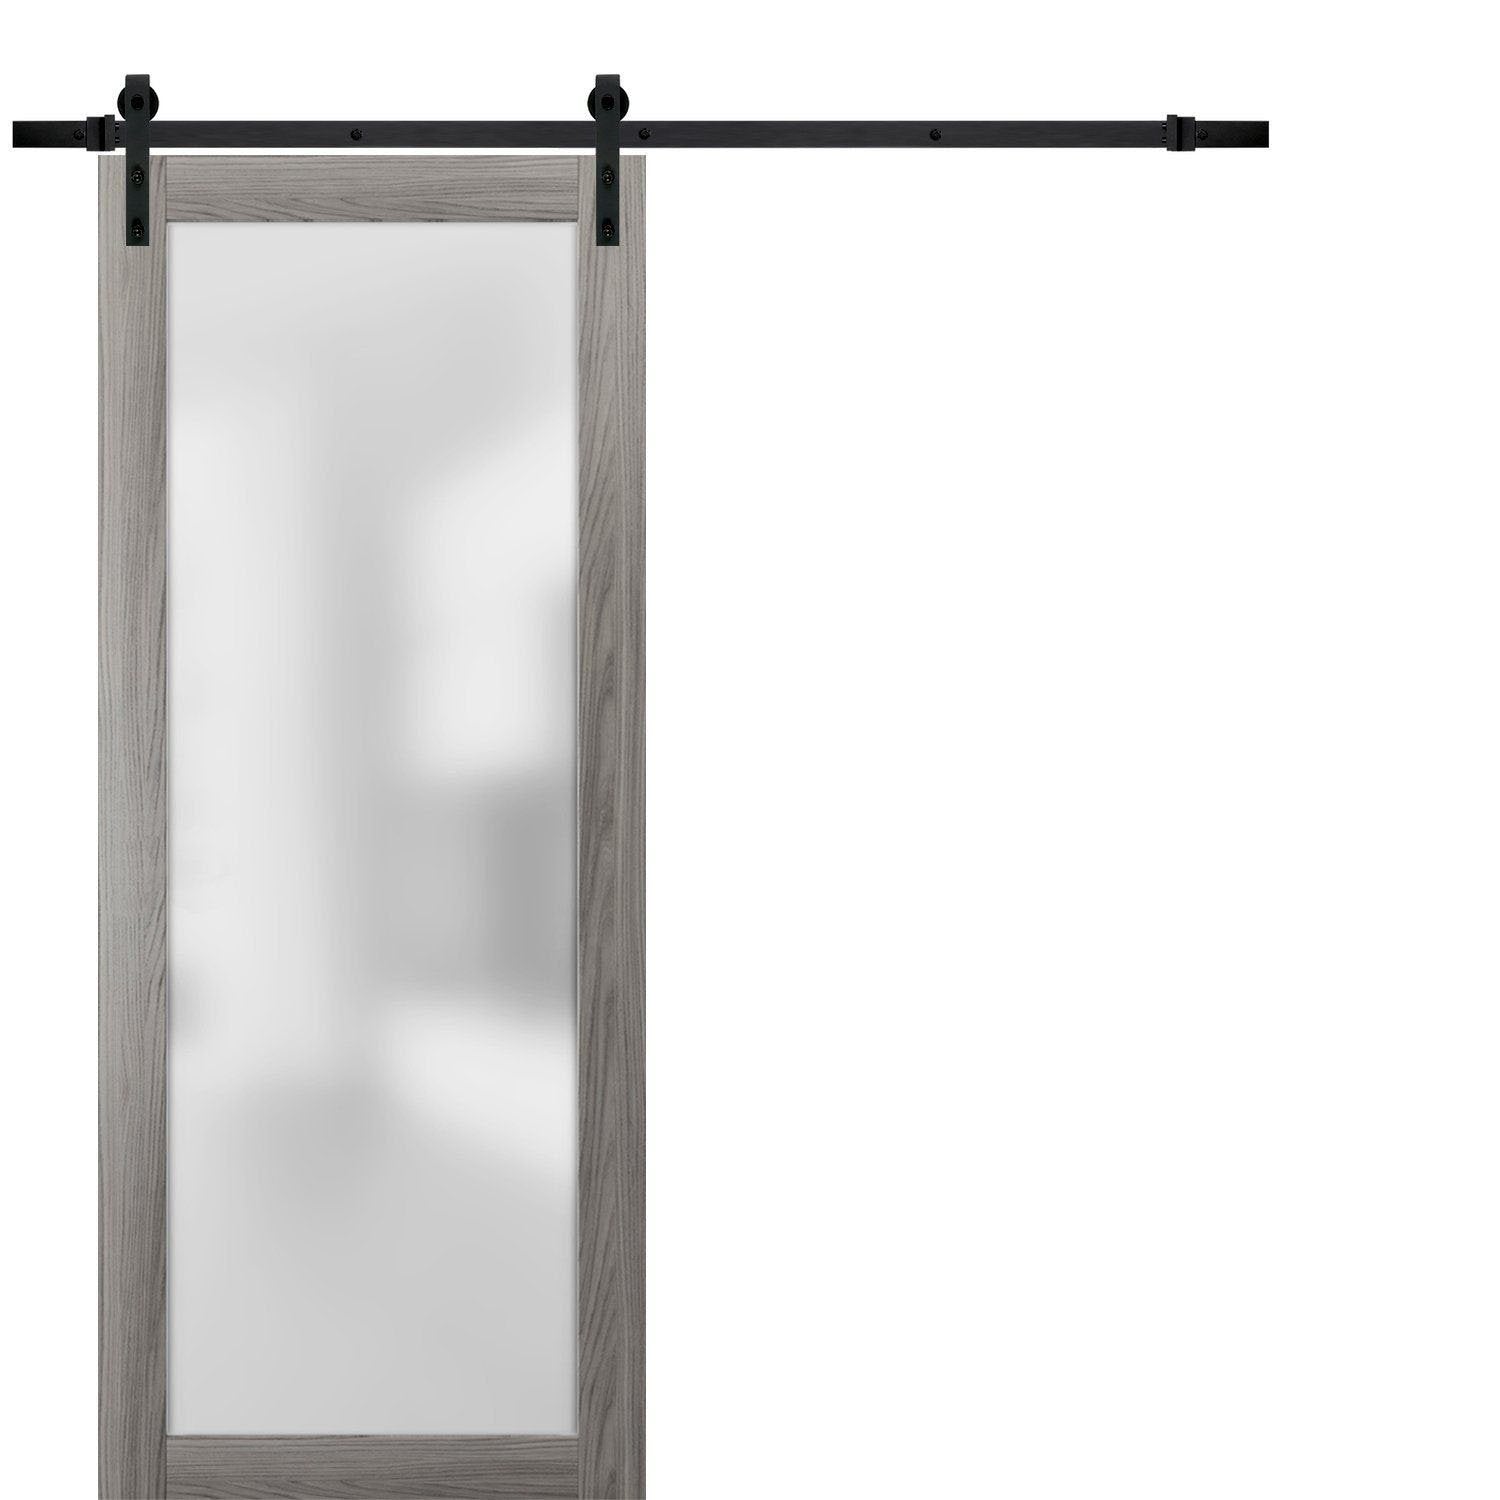 Planum 2102 Ginger Ash Barn Door with Frosted Glass and Black Rail